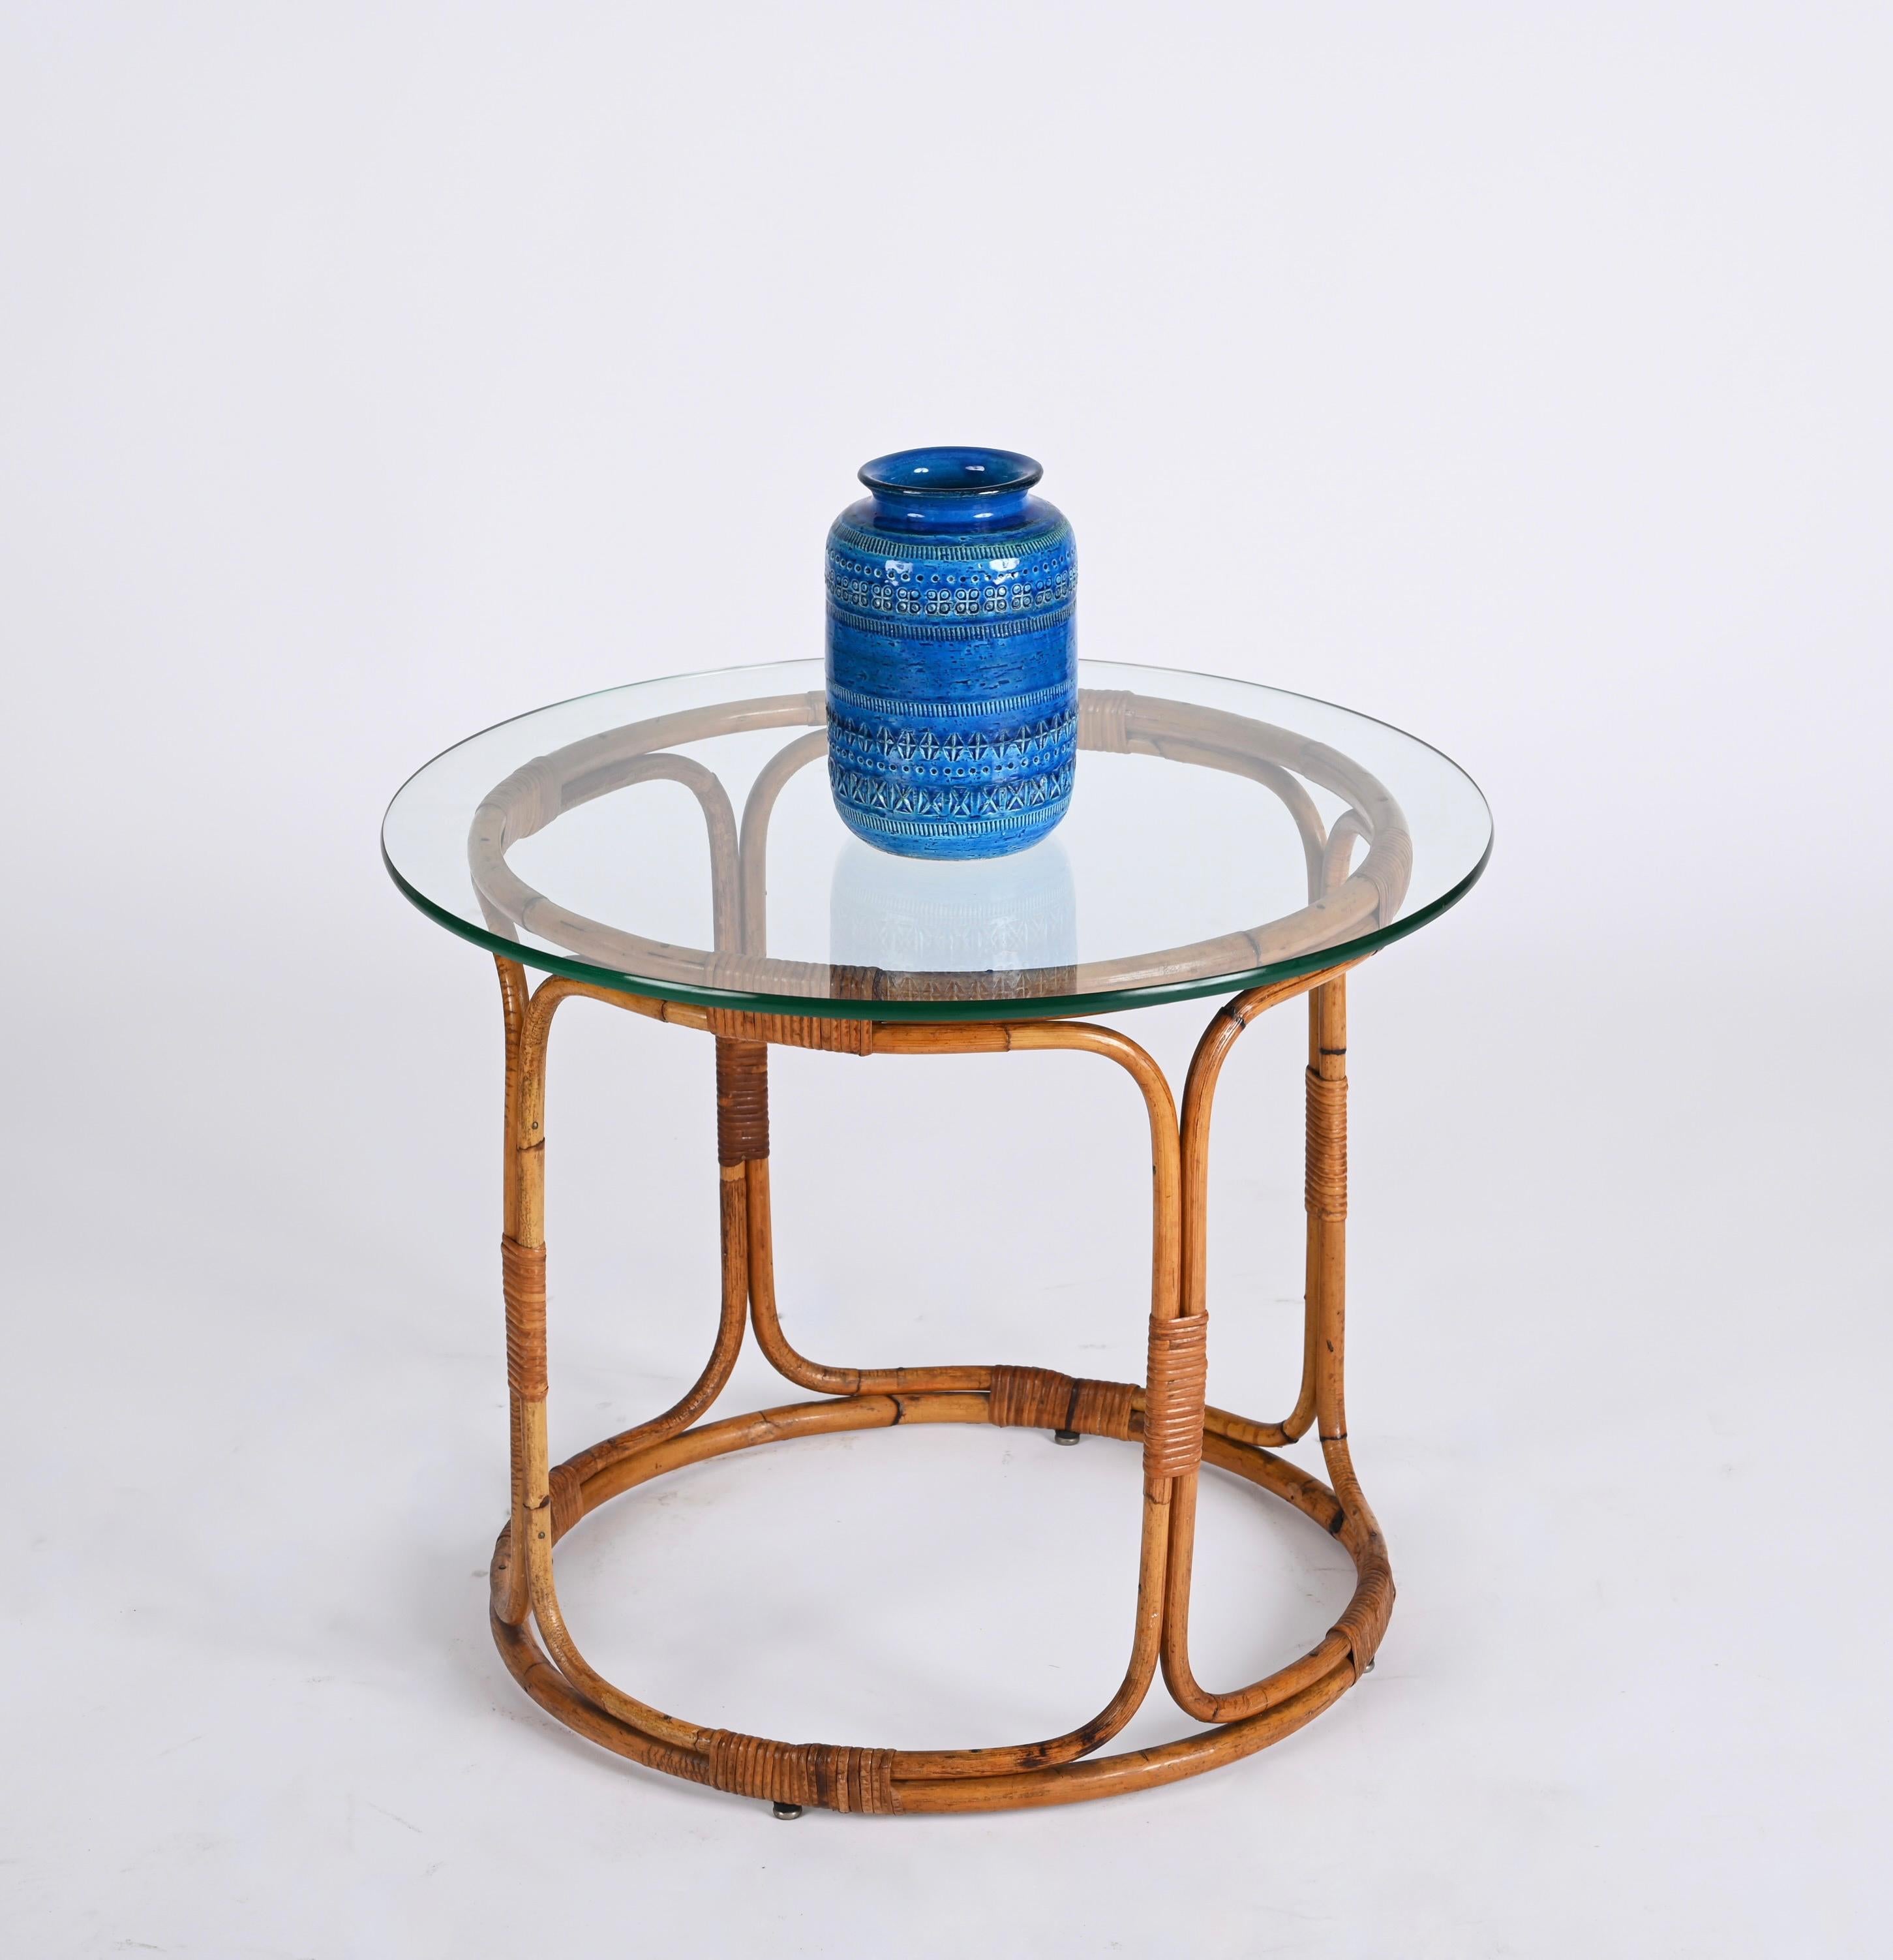 Midcentury Round Rattan, Bamboo Italian Coffee Table with Glass Shelf, 1960s For Sale 5